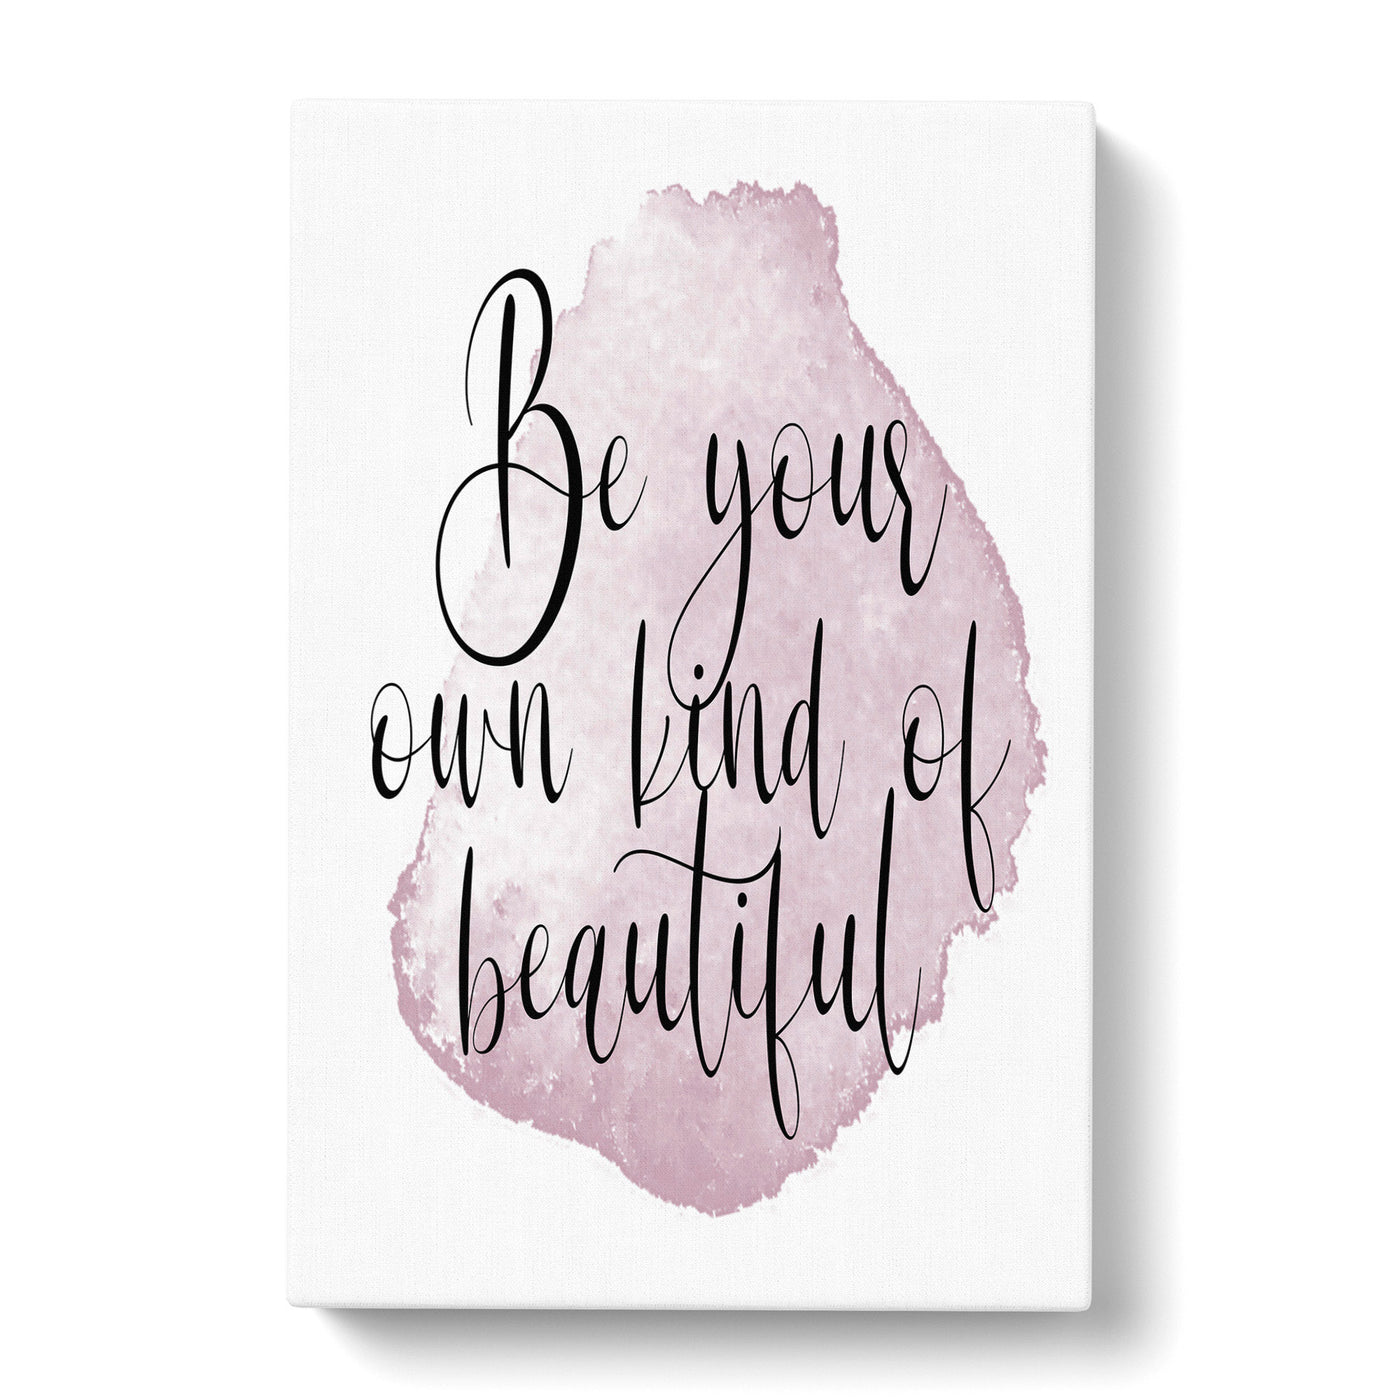 Your Own Kind Of Beautiful Typography Canvas Print Main Image